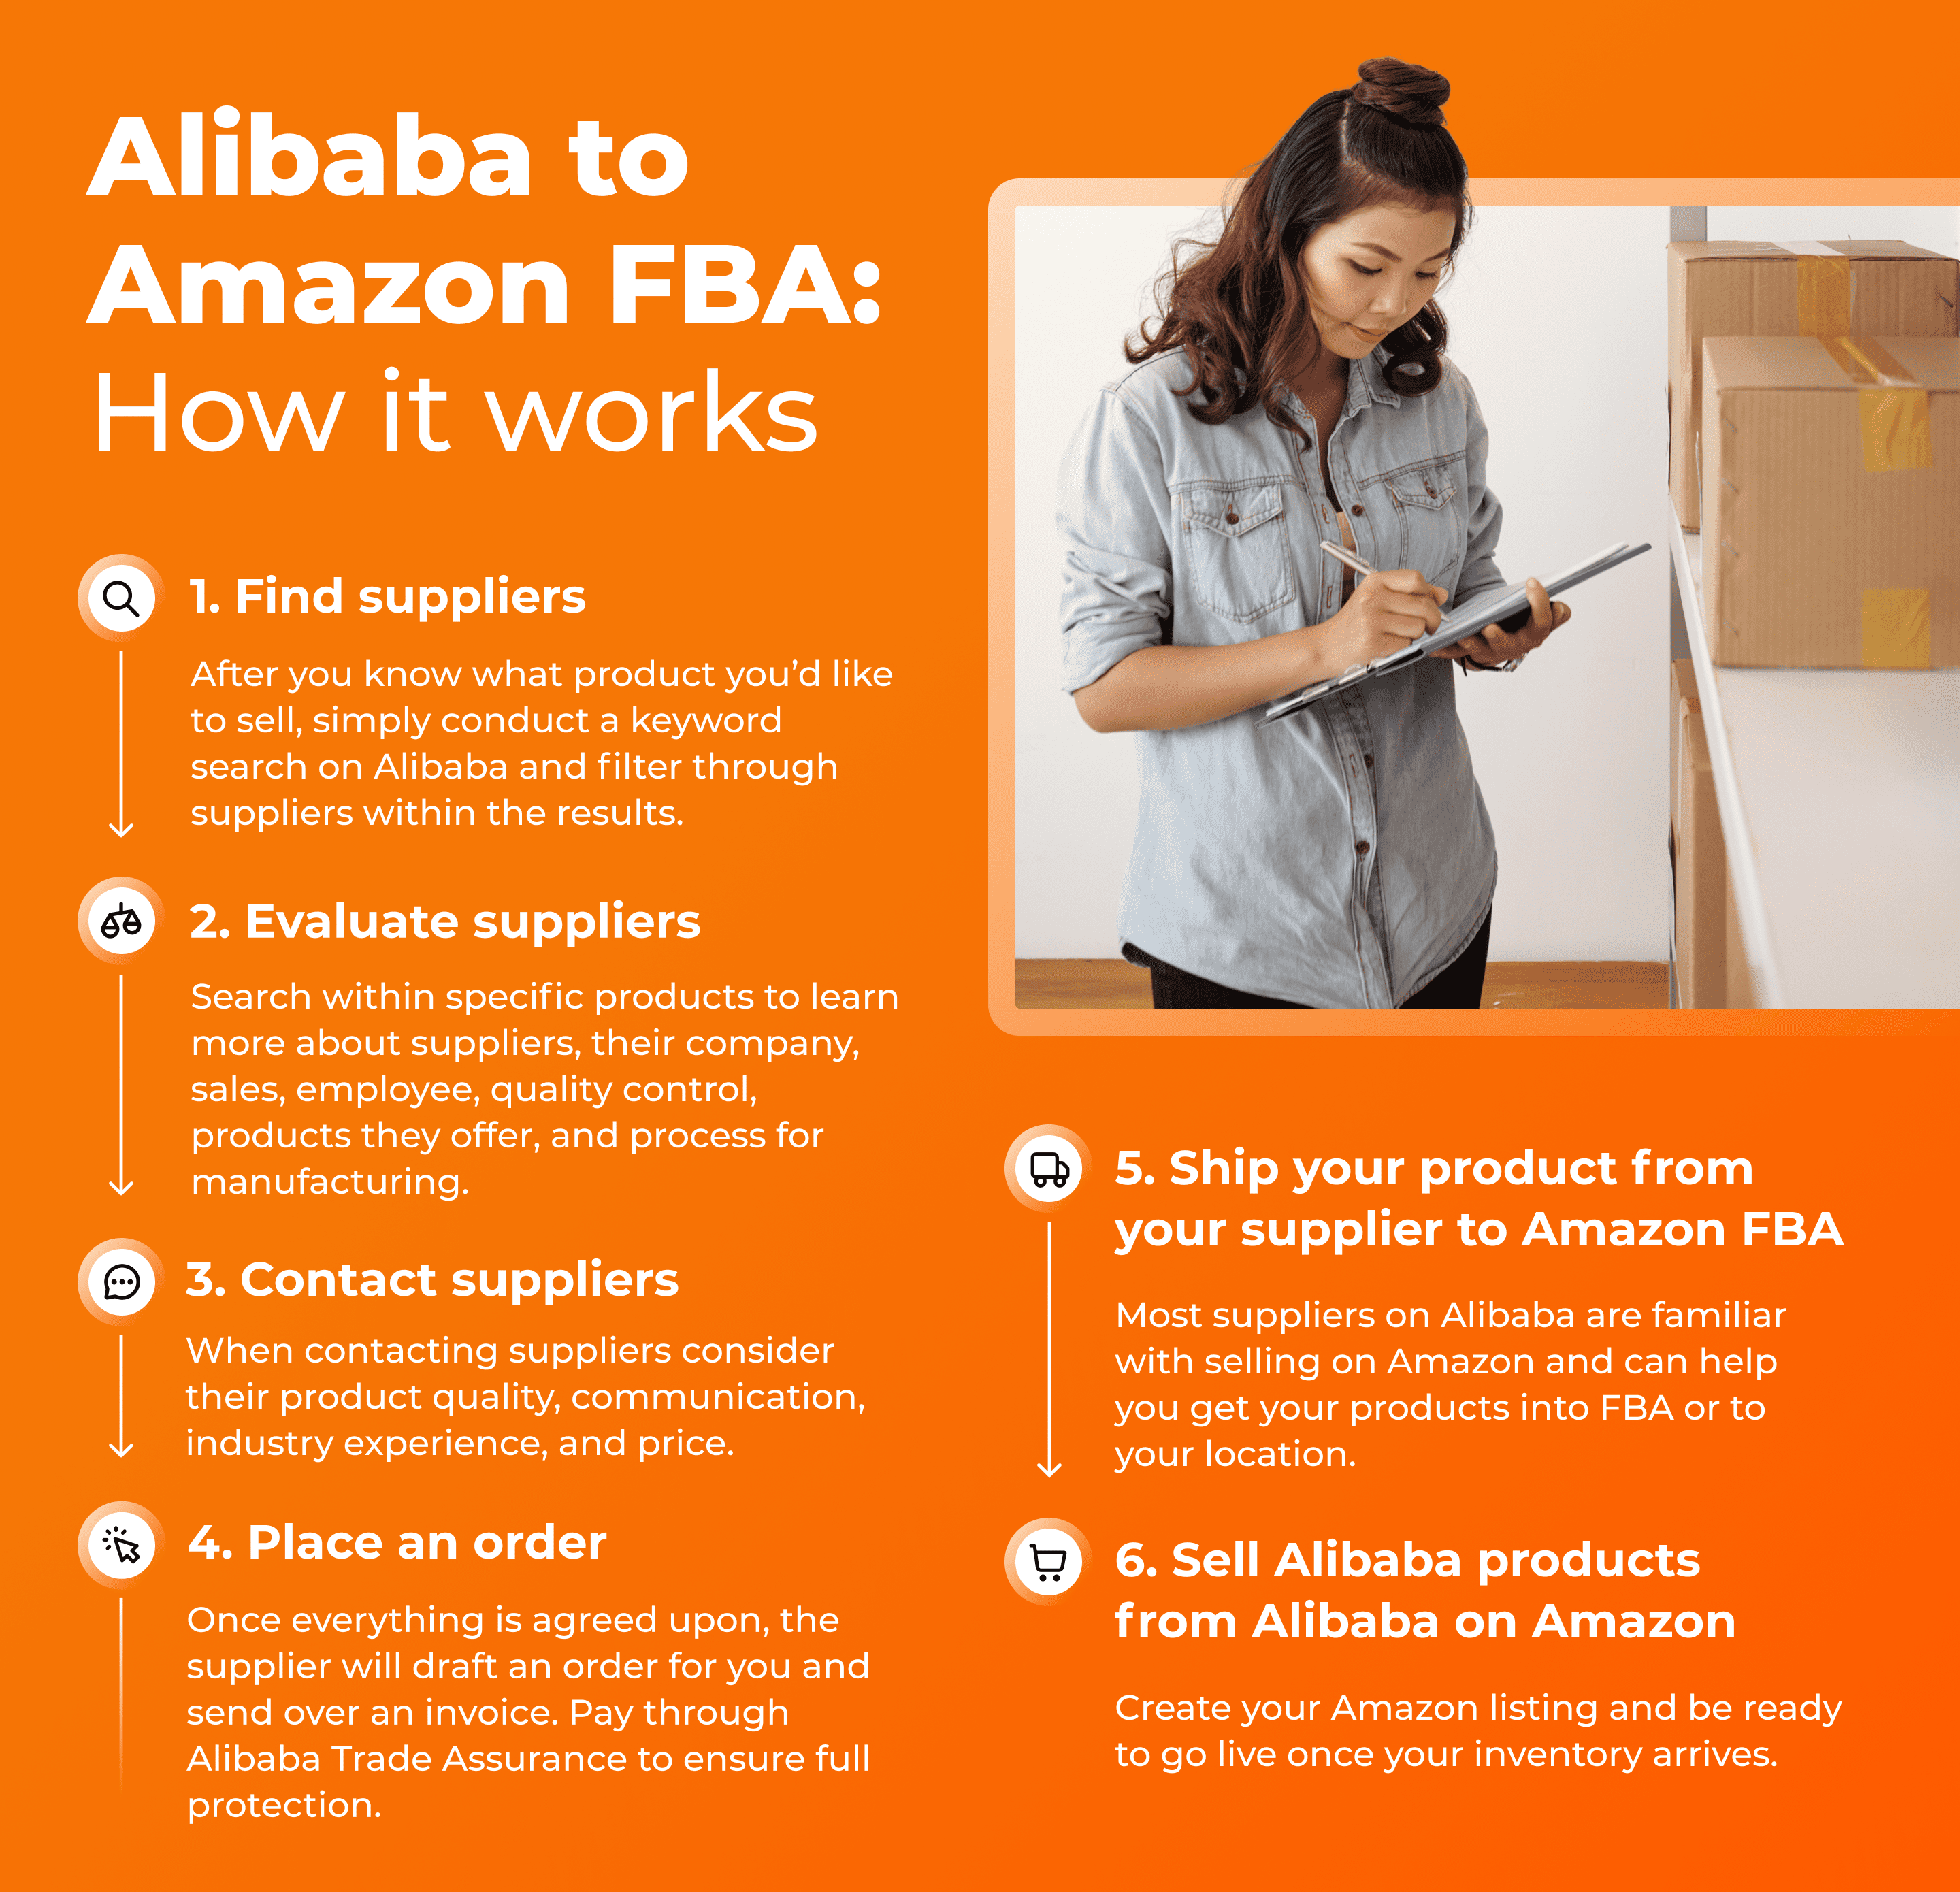 how to sell on amazon from alibaba